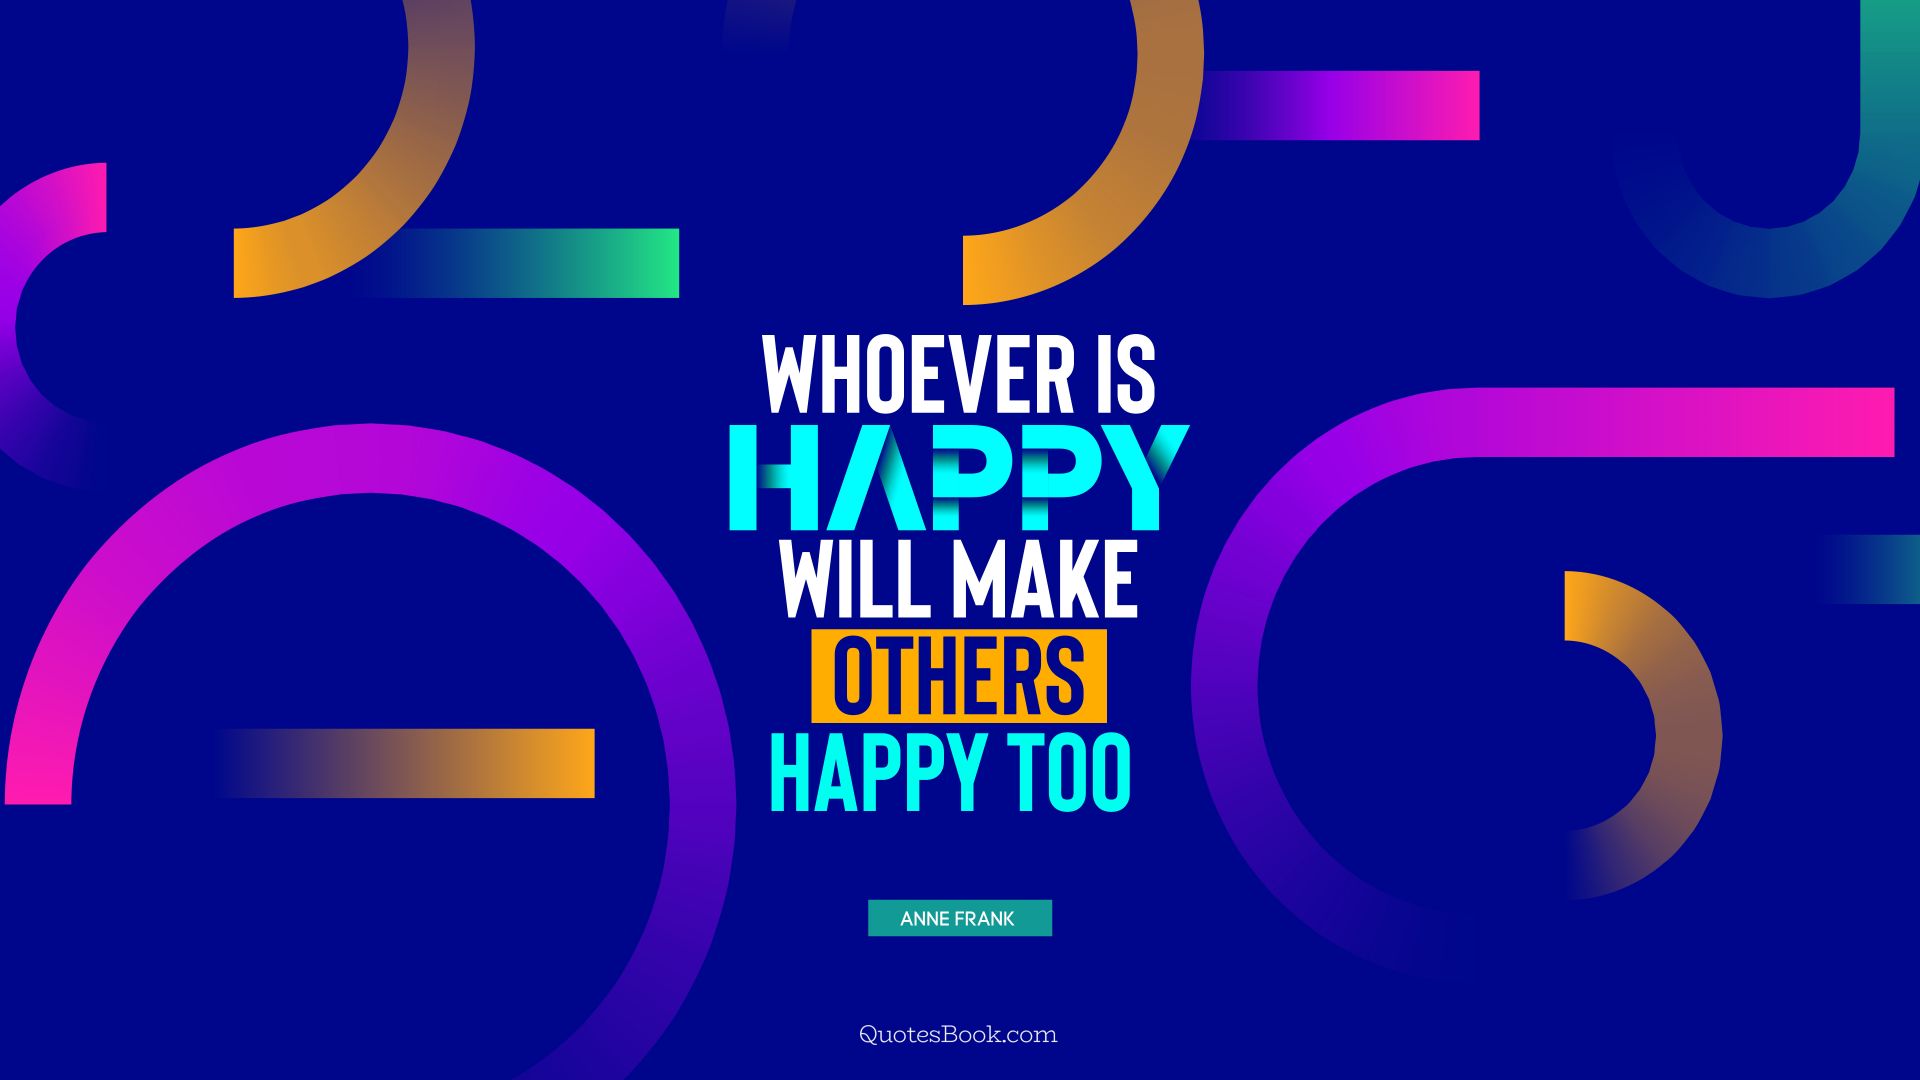 Whoever is happy will make others happy too . - Quote by Anne Frank